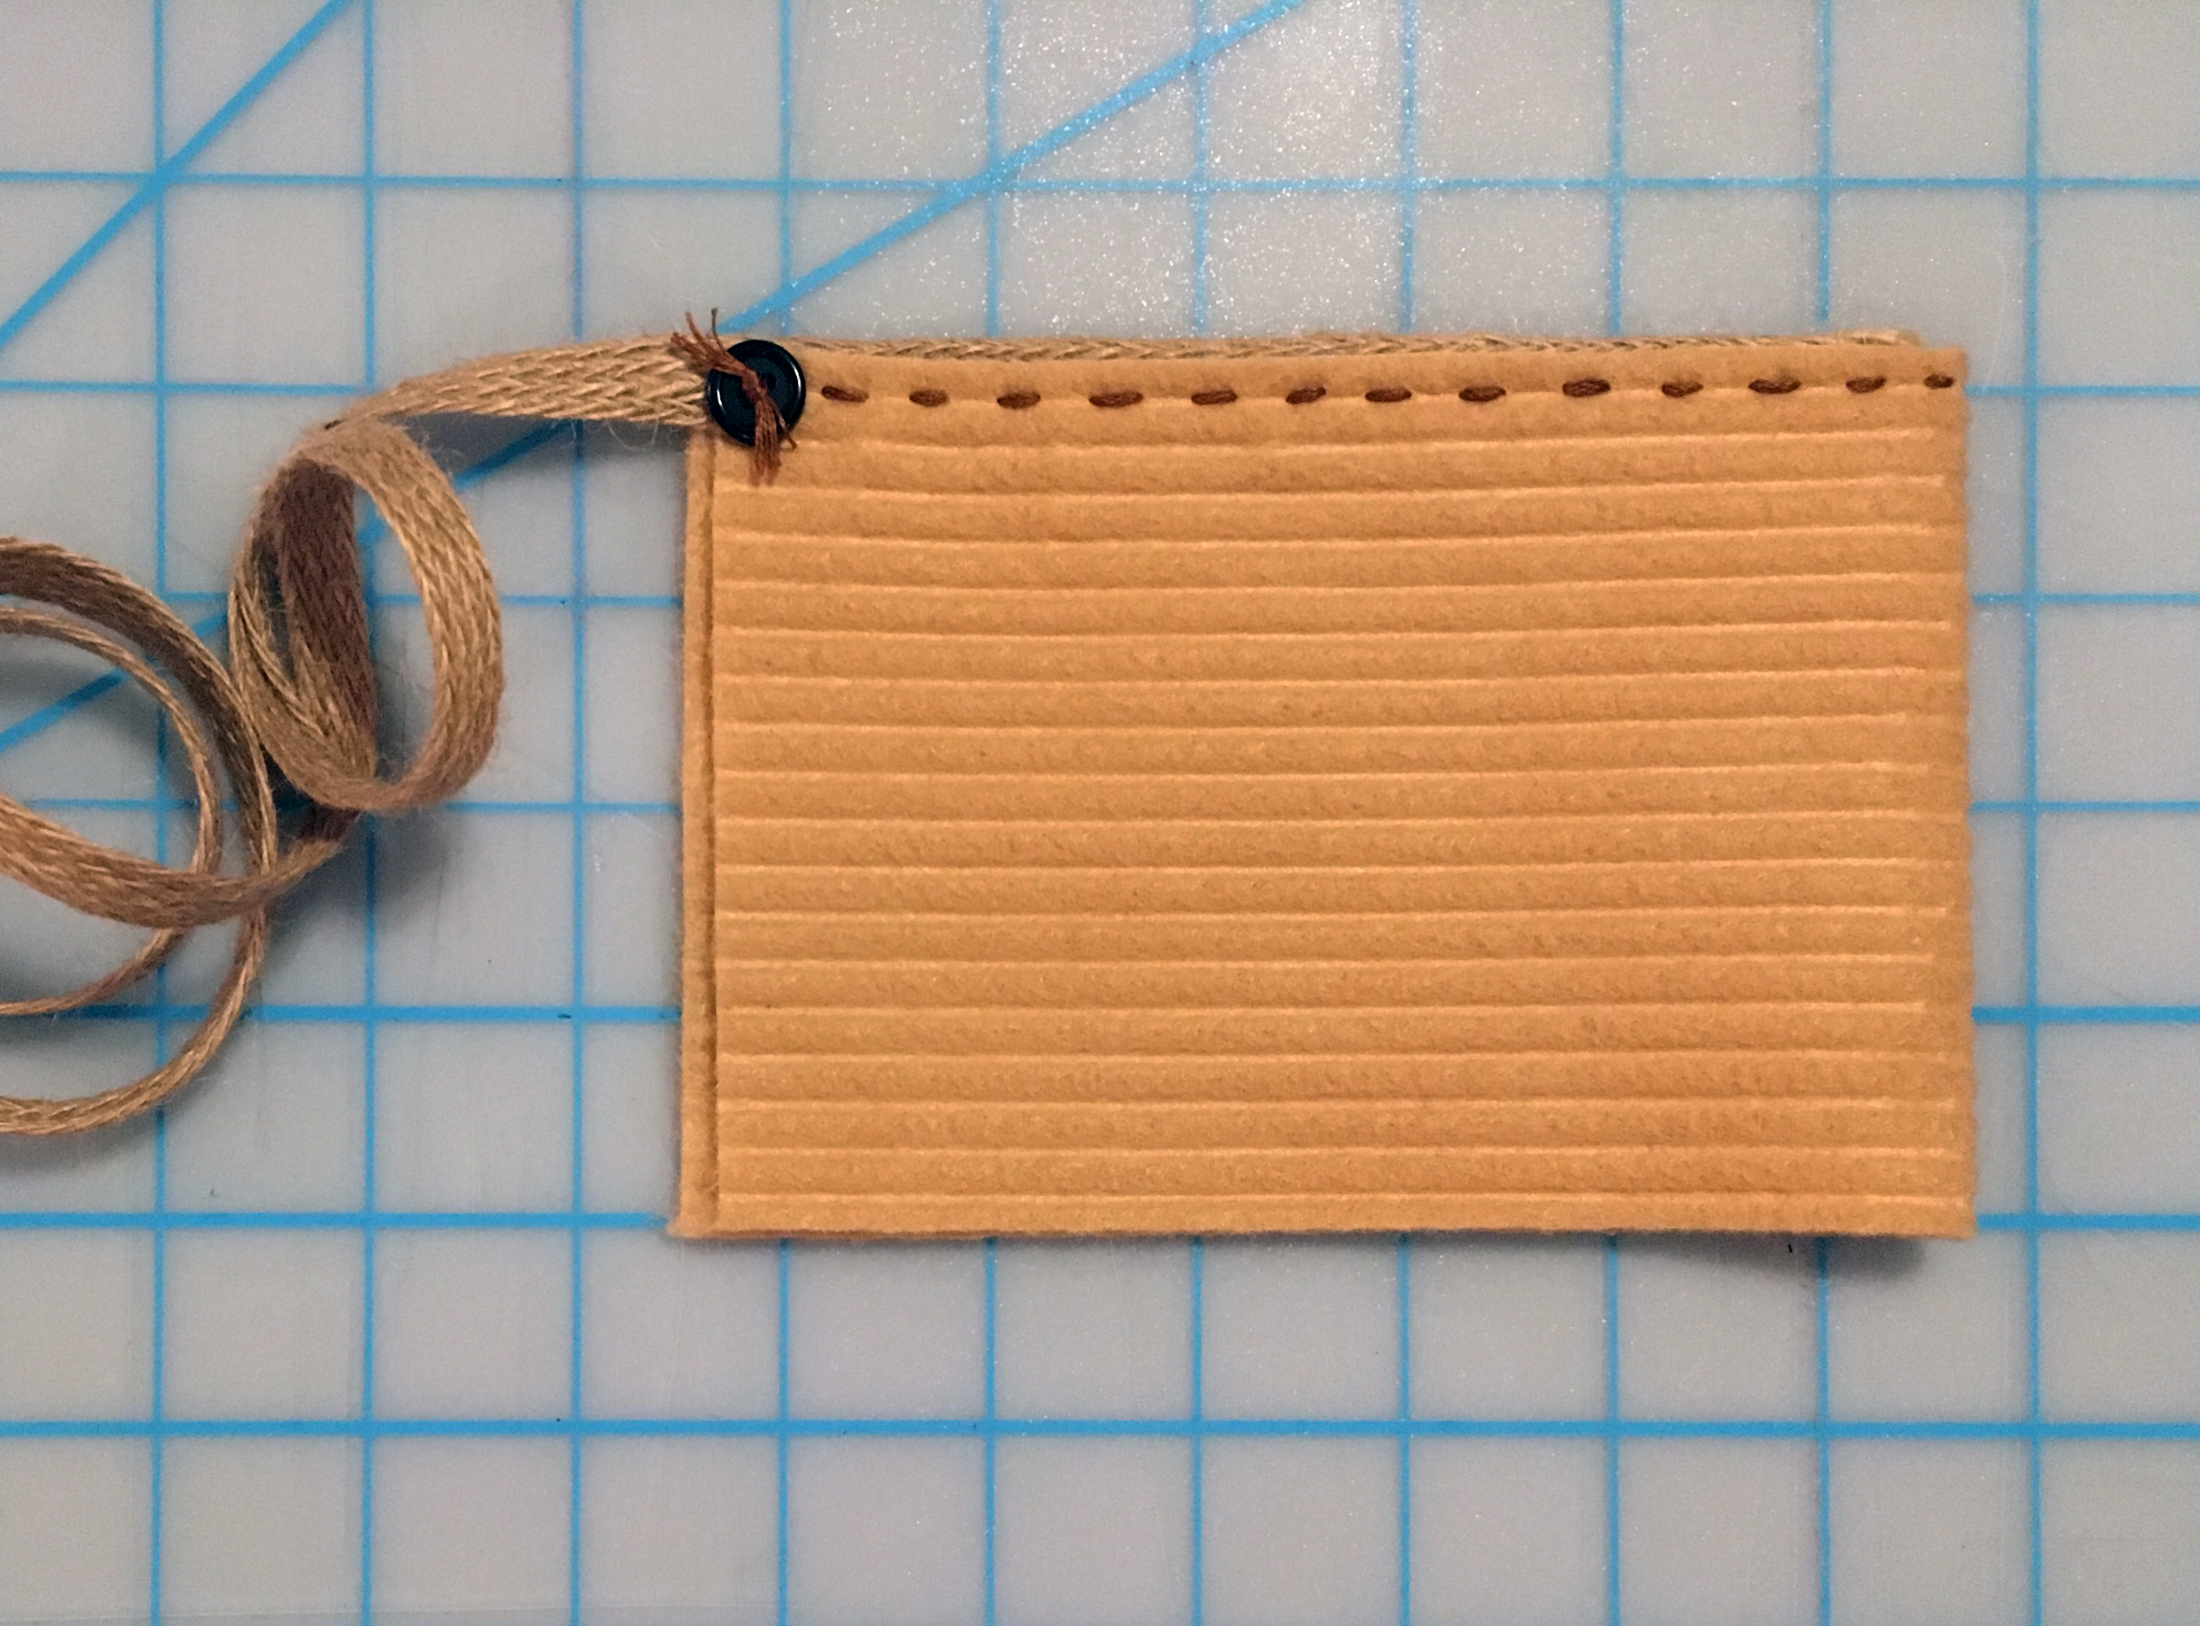 Step 2 - Cell Phone Pouch